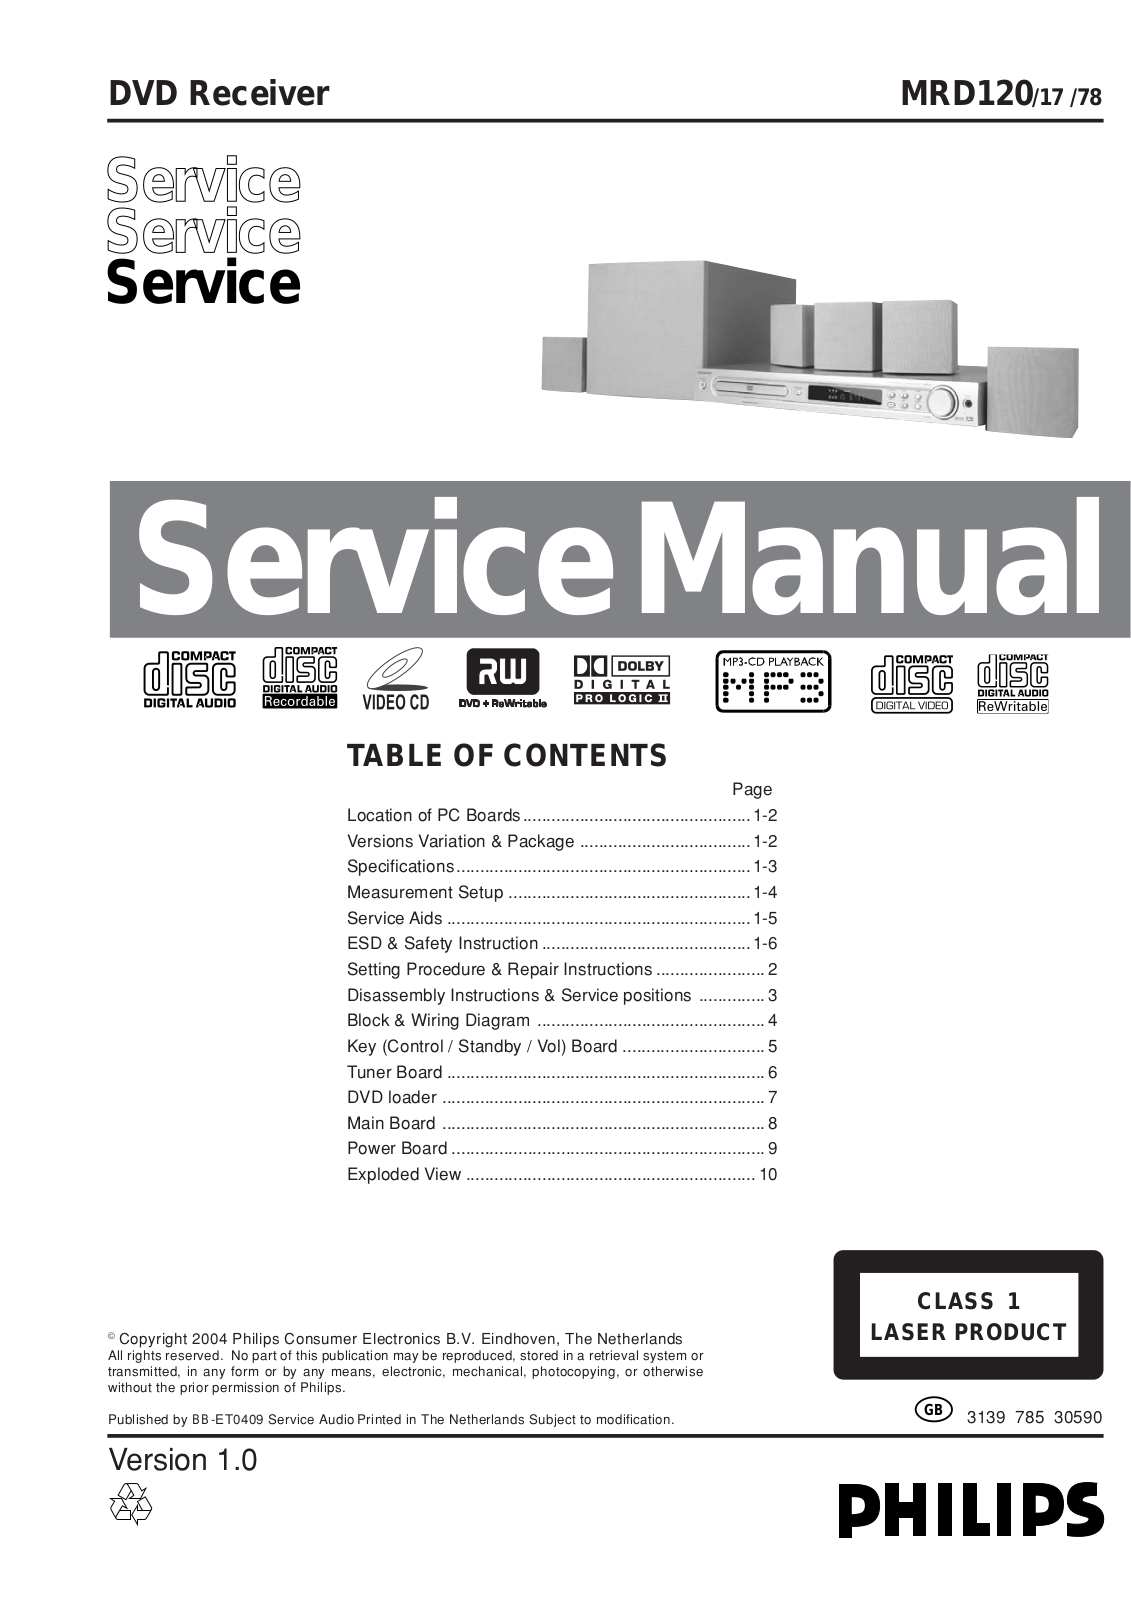 Philips MDR120 78, MRD120 17 Service Manual